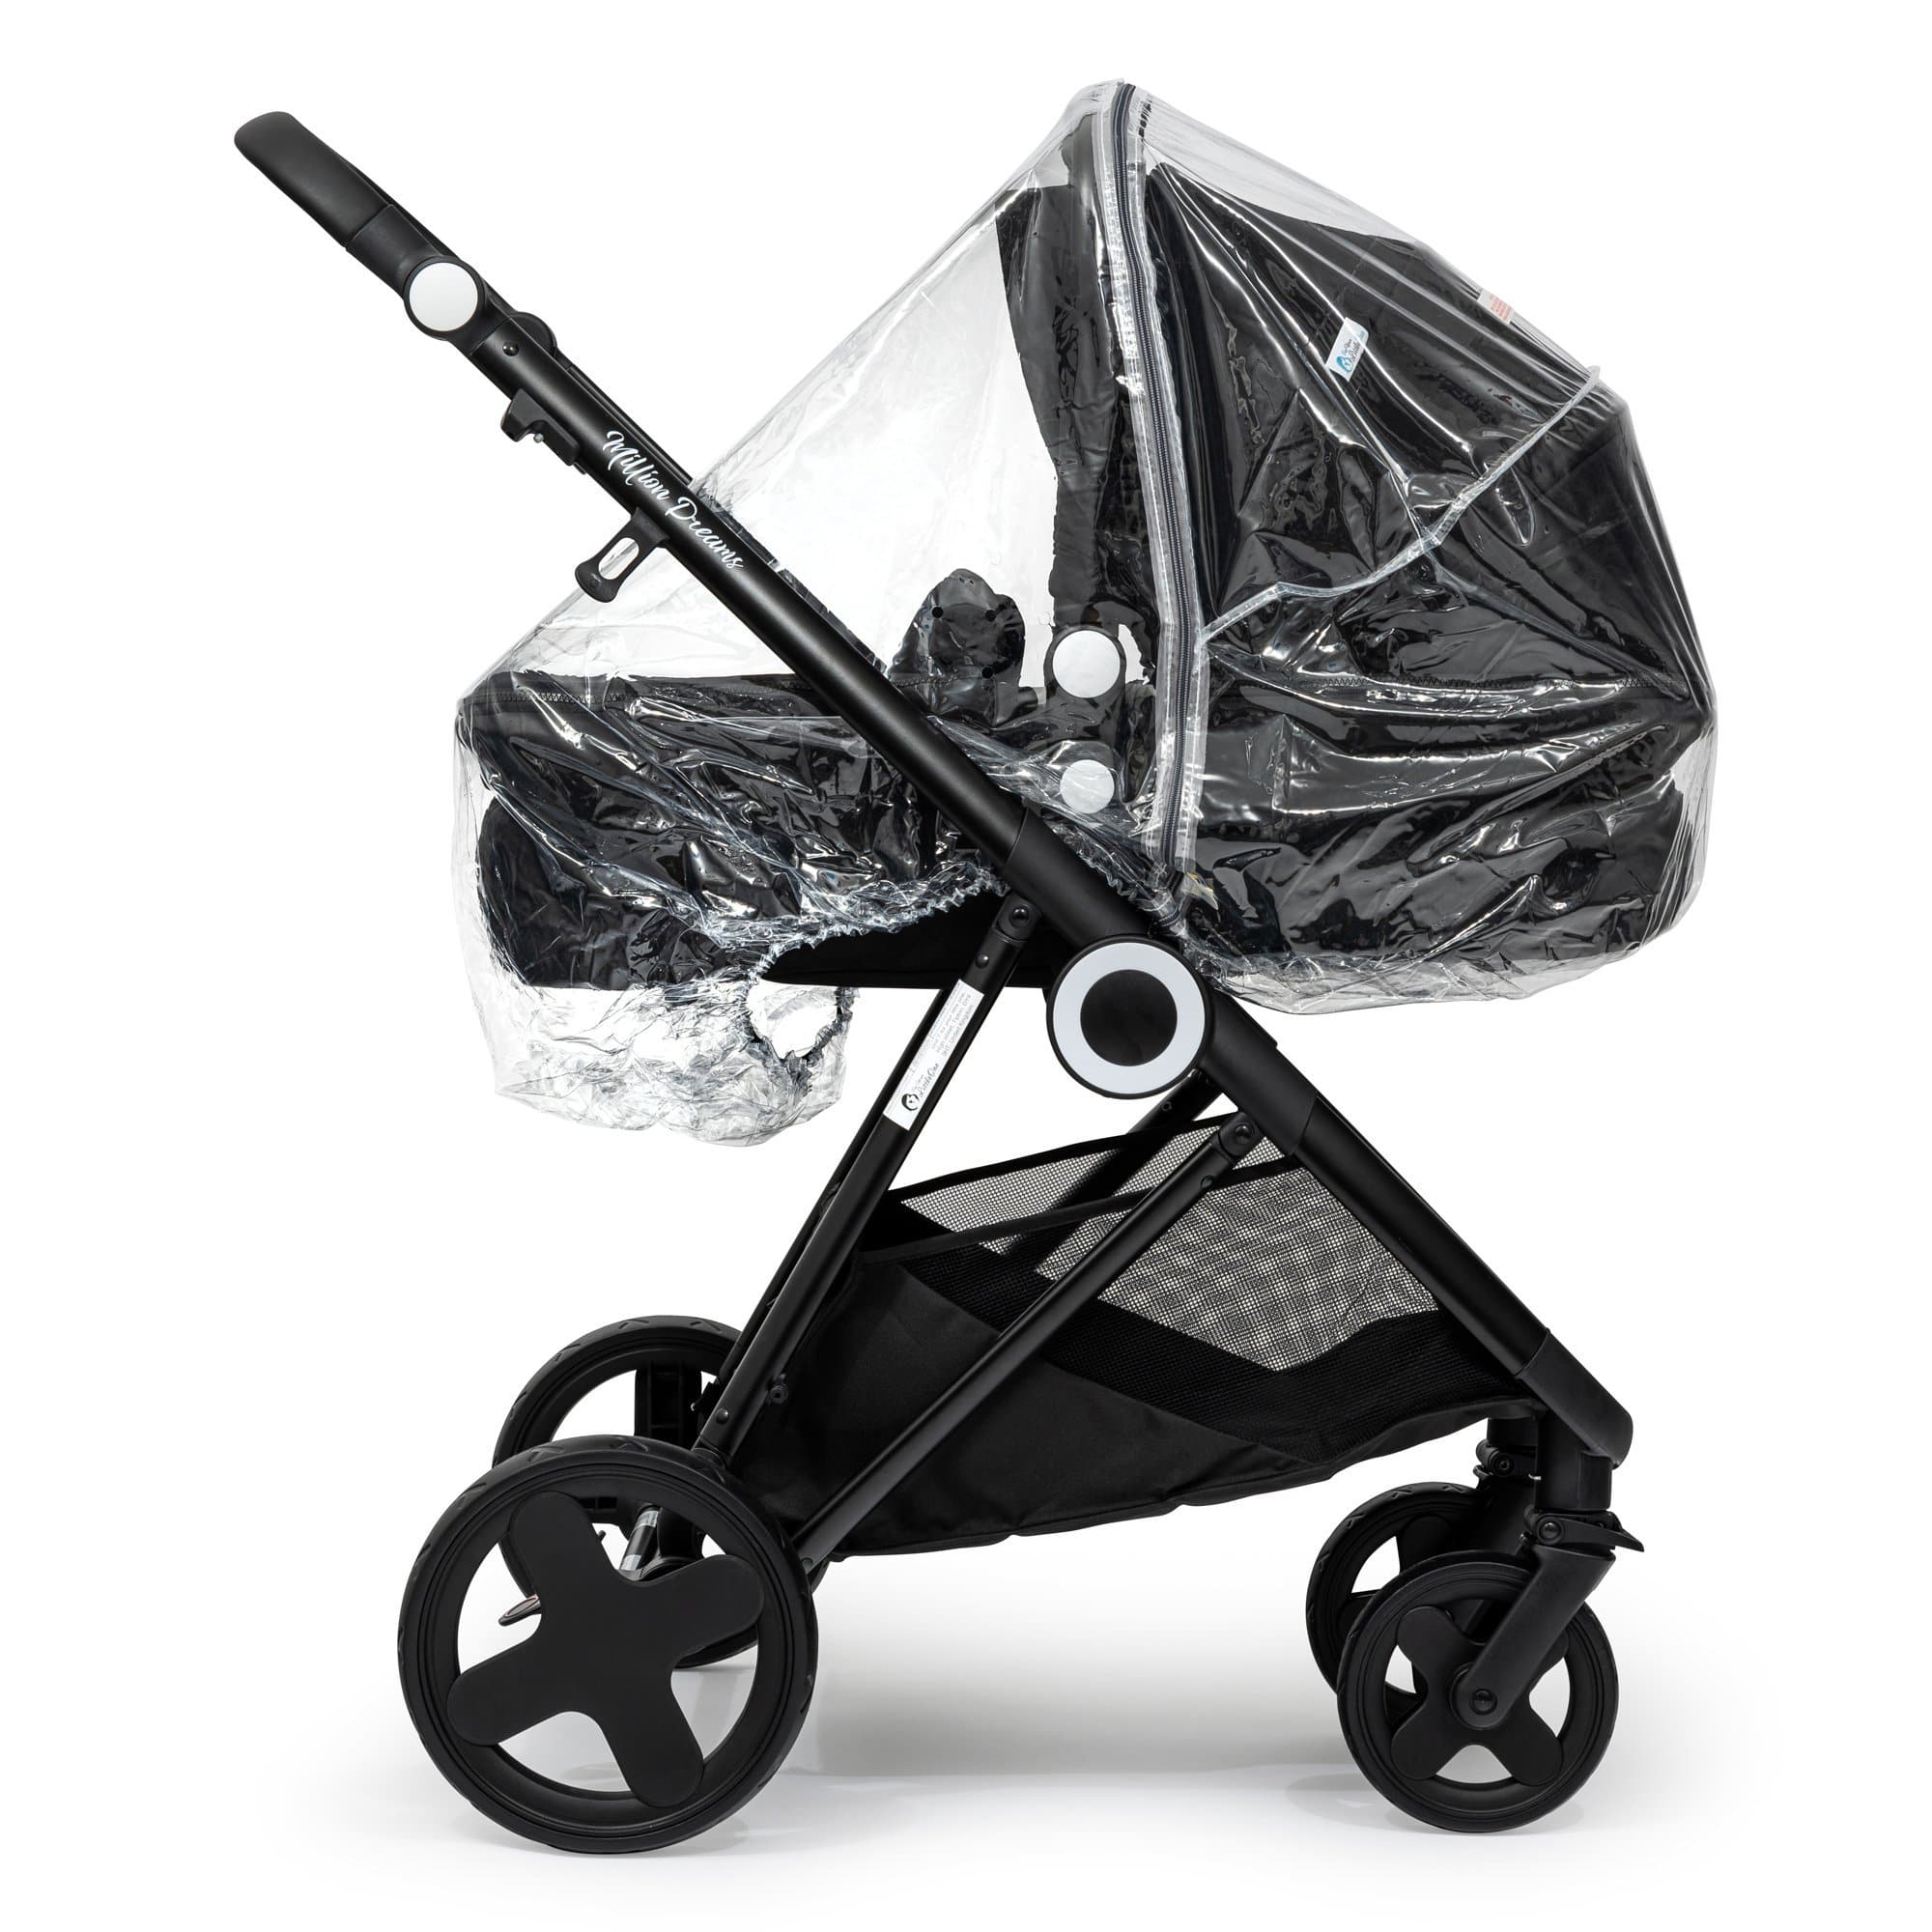 2 in 1 Rain Cover Compatible with Joolz - Fits All Models - For Your Little One